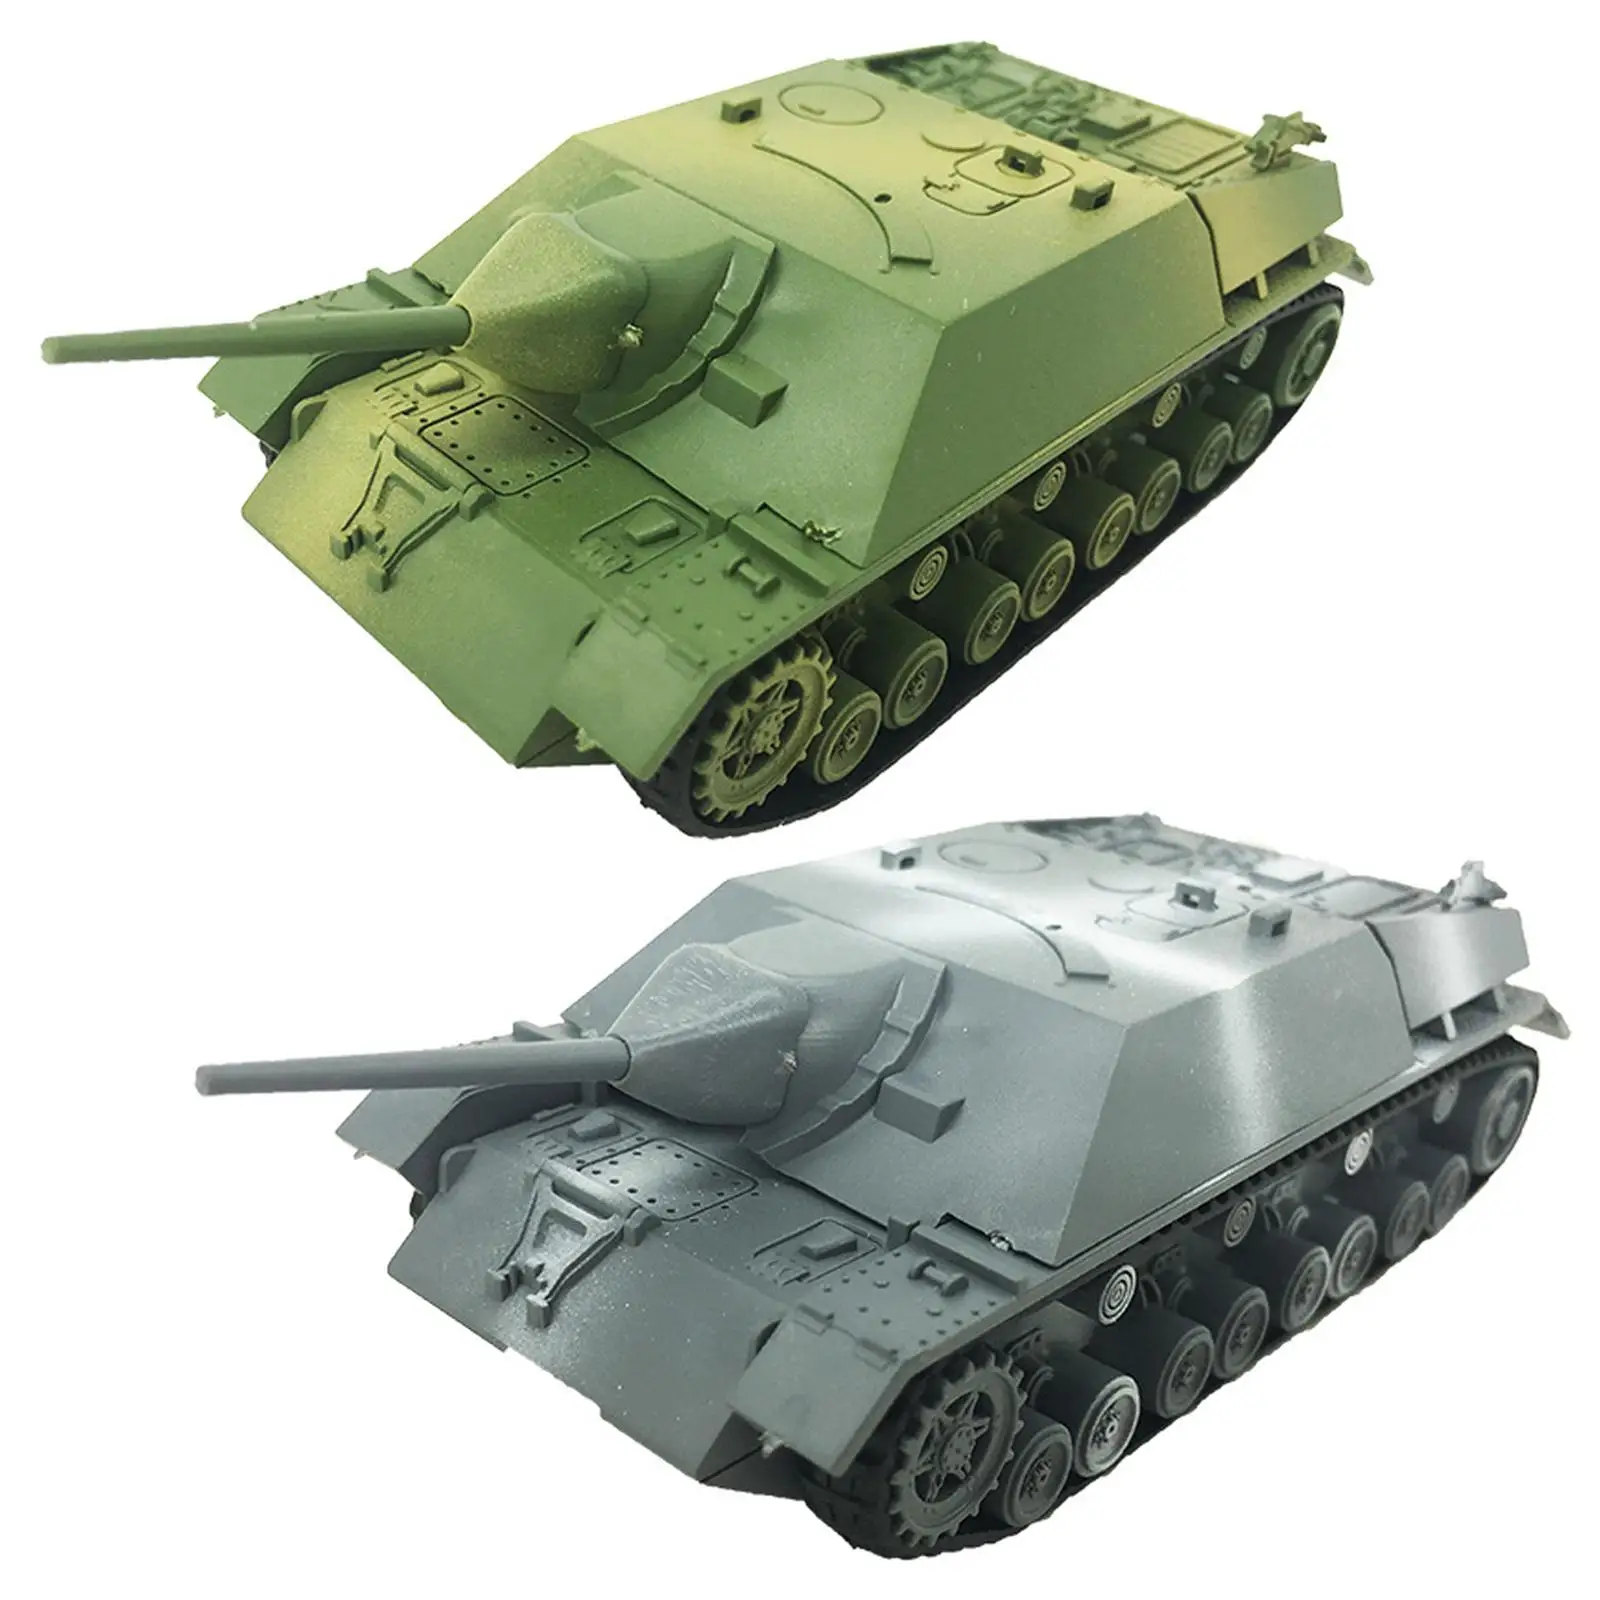 1/72 Tank Model 4D Model Puzzles Toy DIY Tank Puzzle DIY Assemble Tank Toy Model Building Kit for Adults Kids Boy Birthday Gift